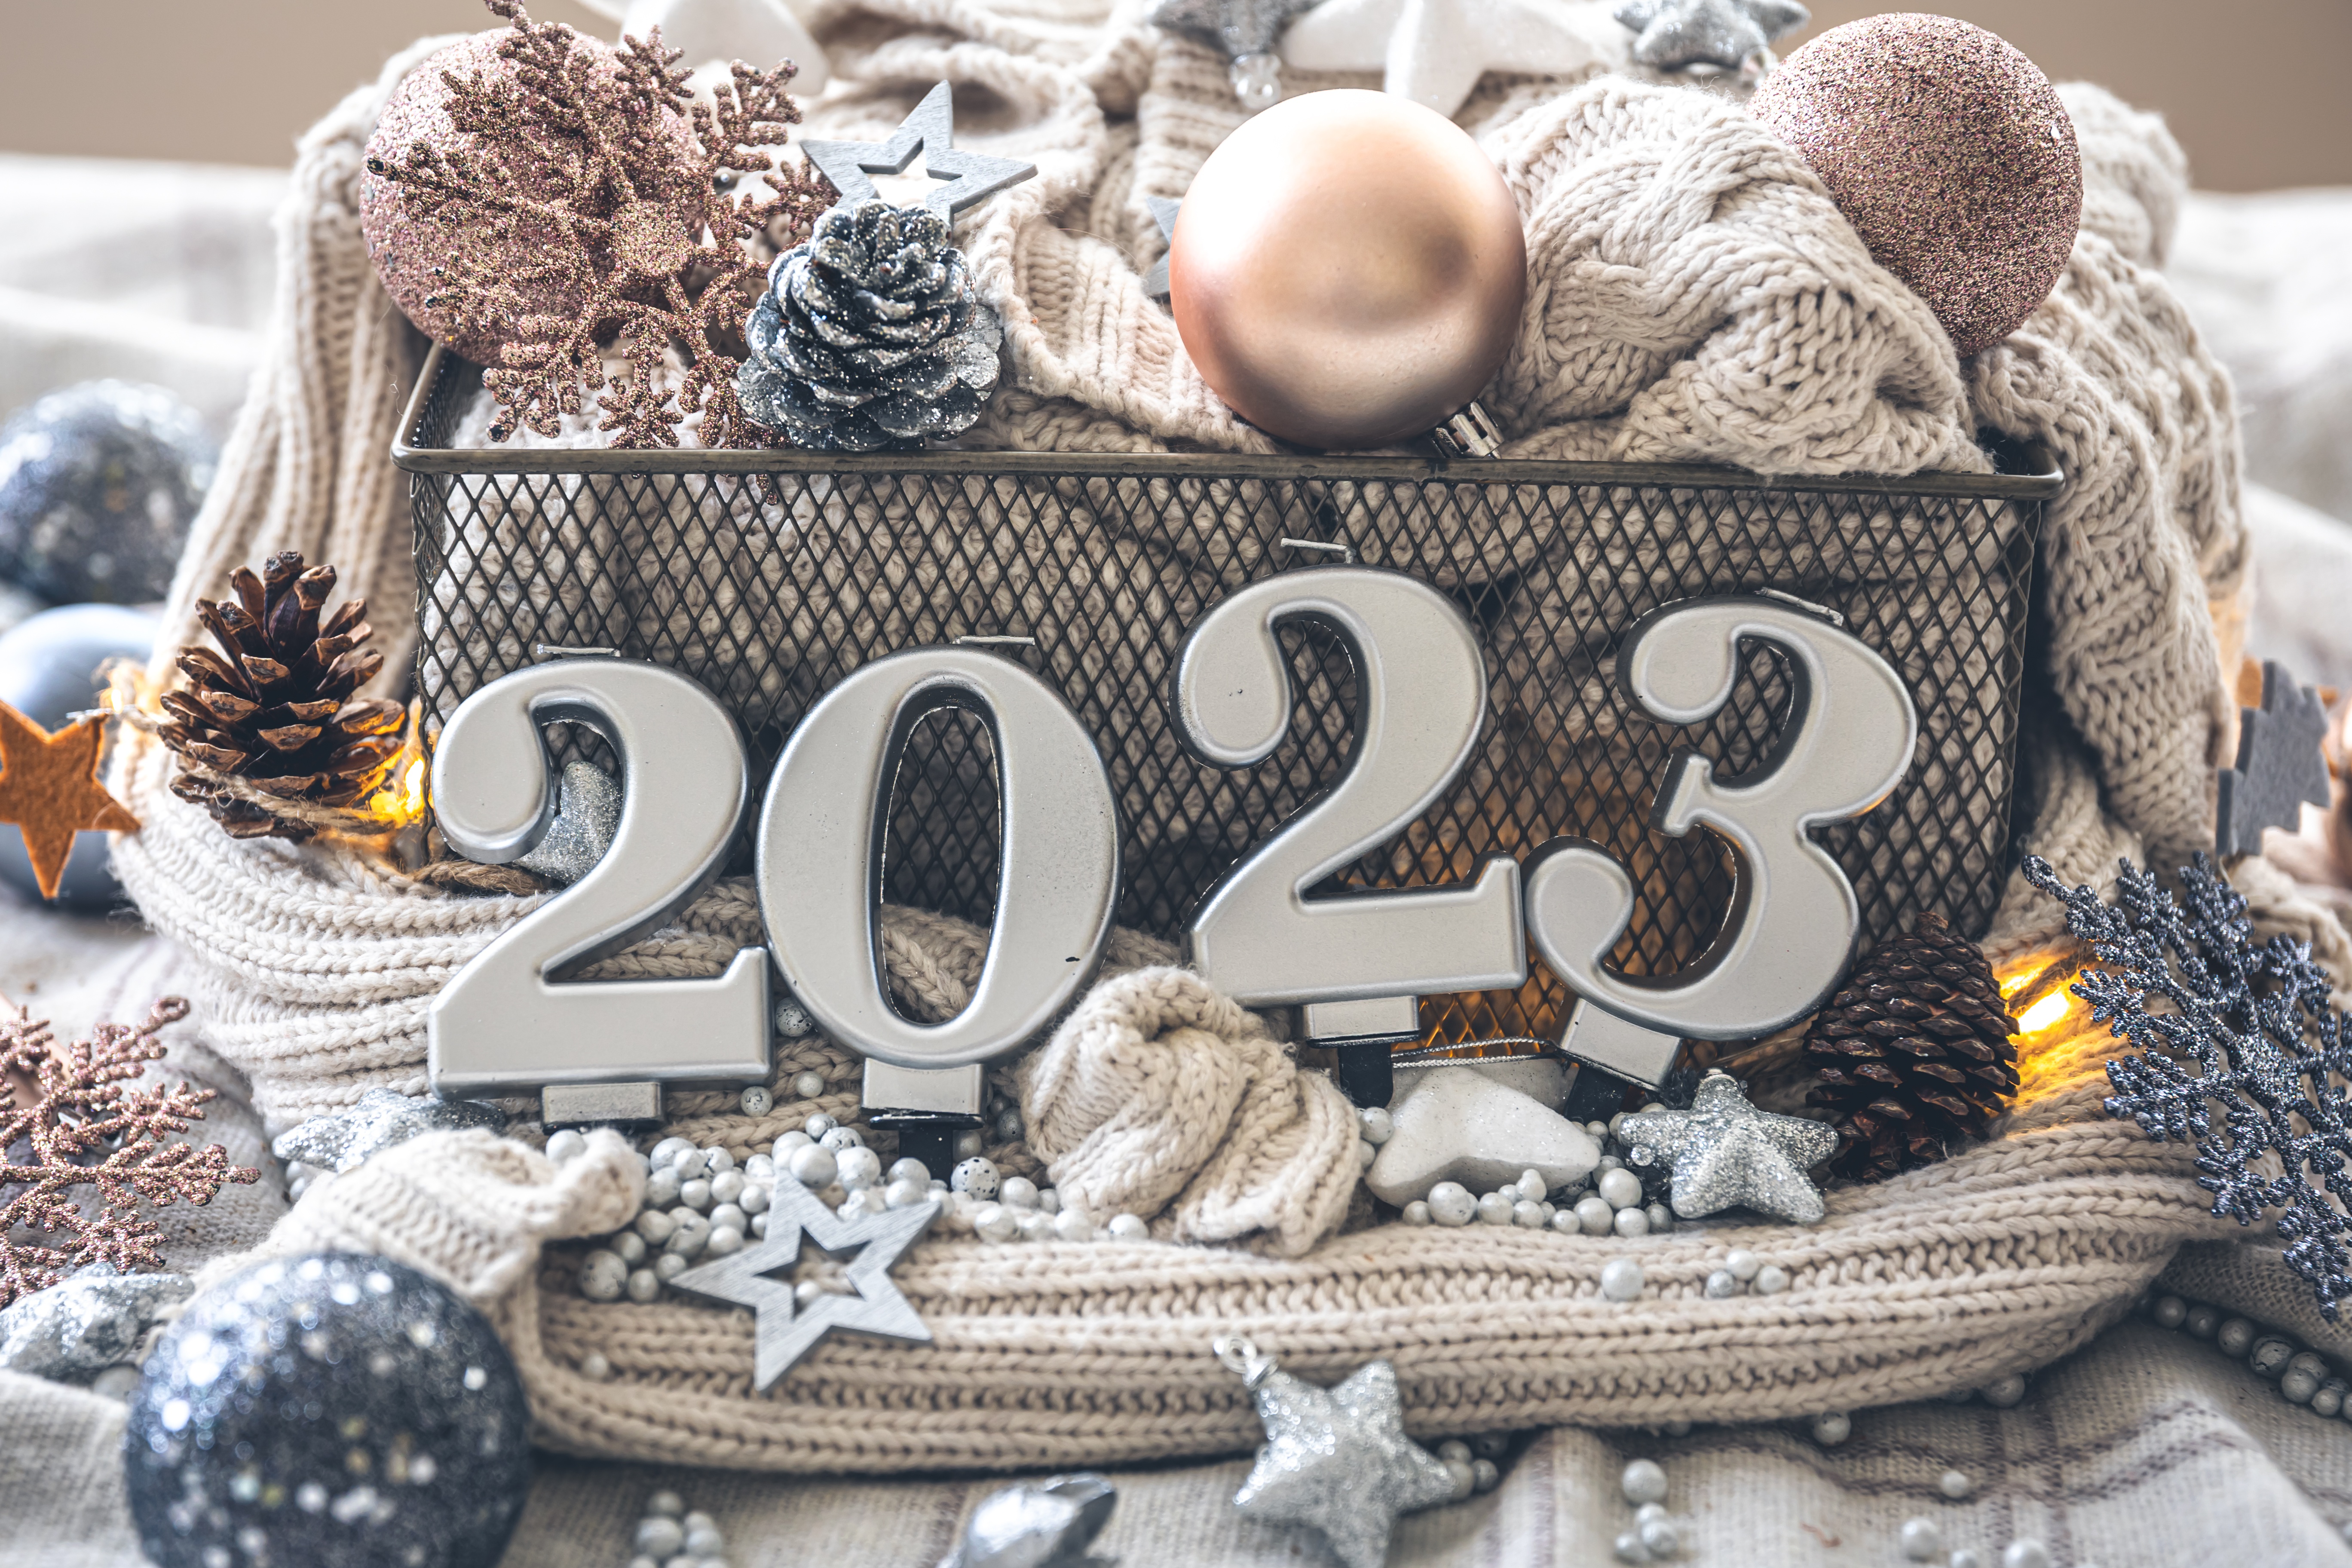 New Year 2023 HD Wallpaper and Background